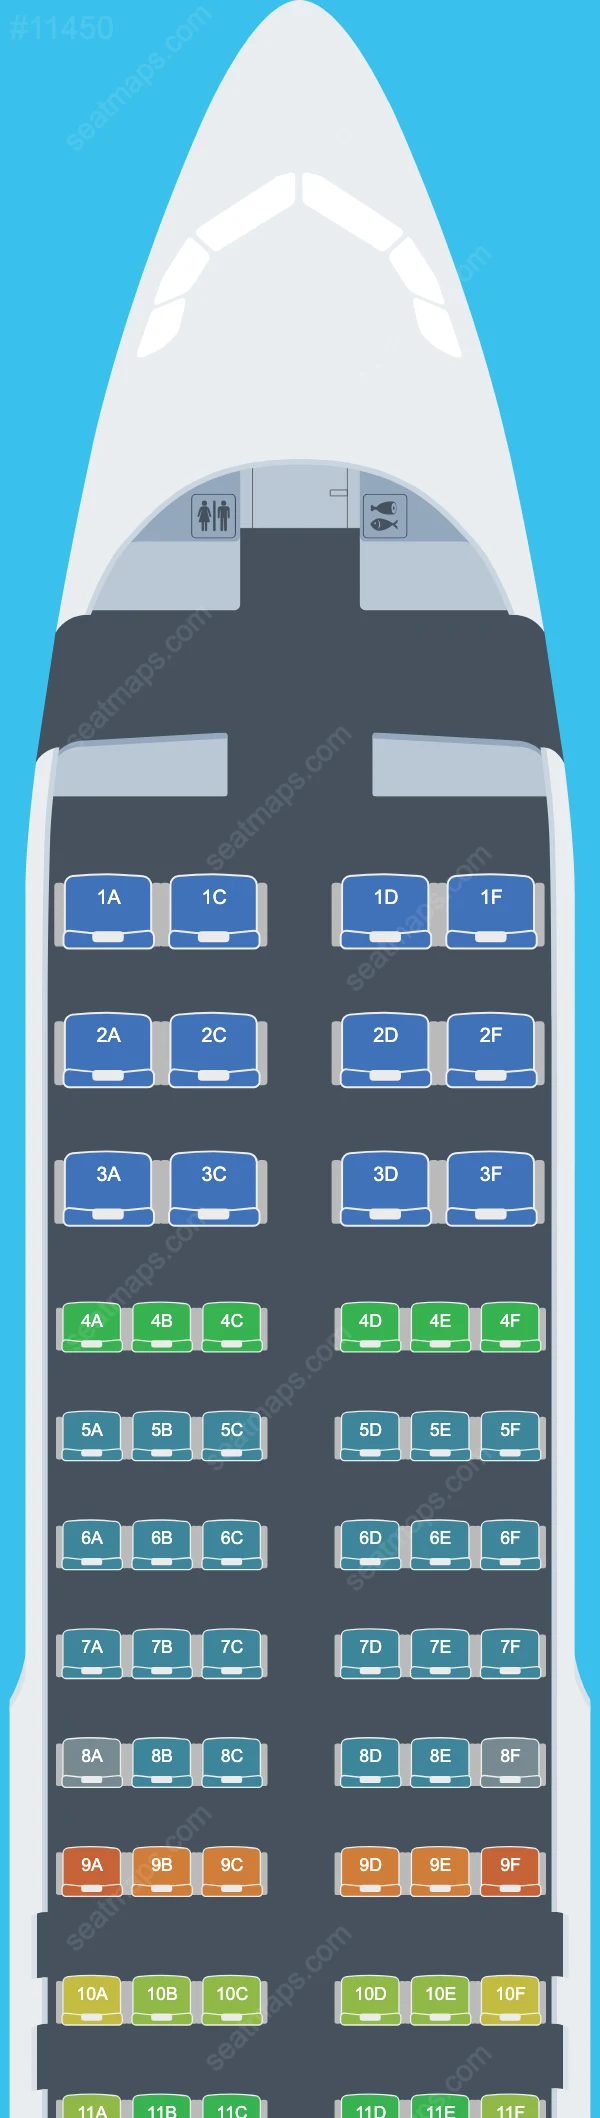 SmartLynx Airlines Malta Airbus A320 Seat Maps A320-200 V.2